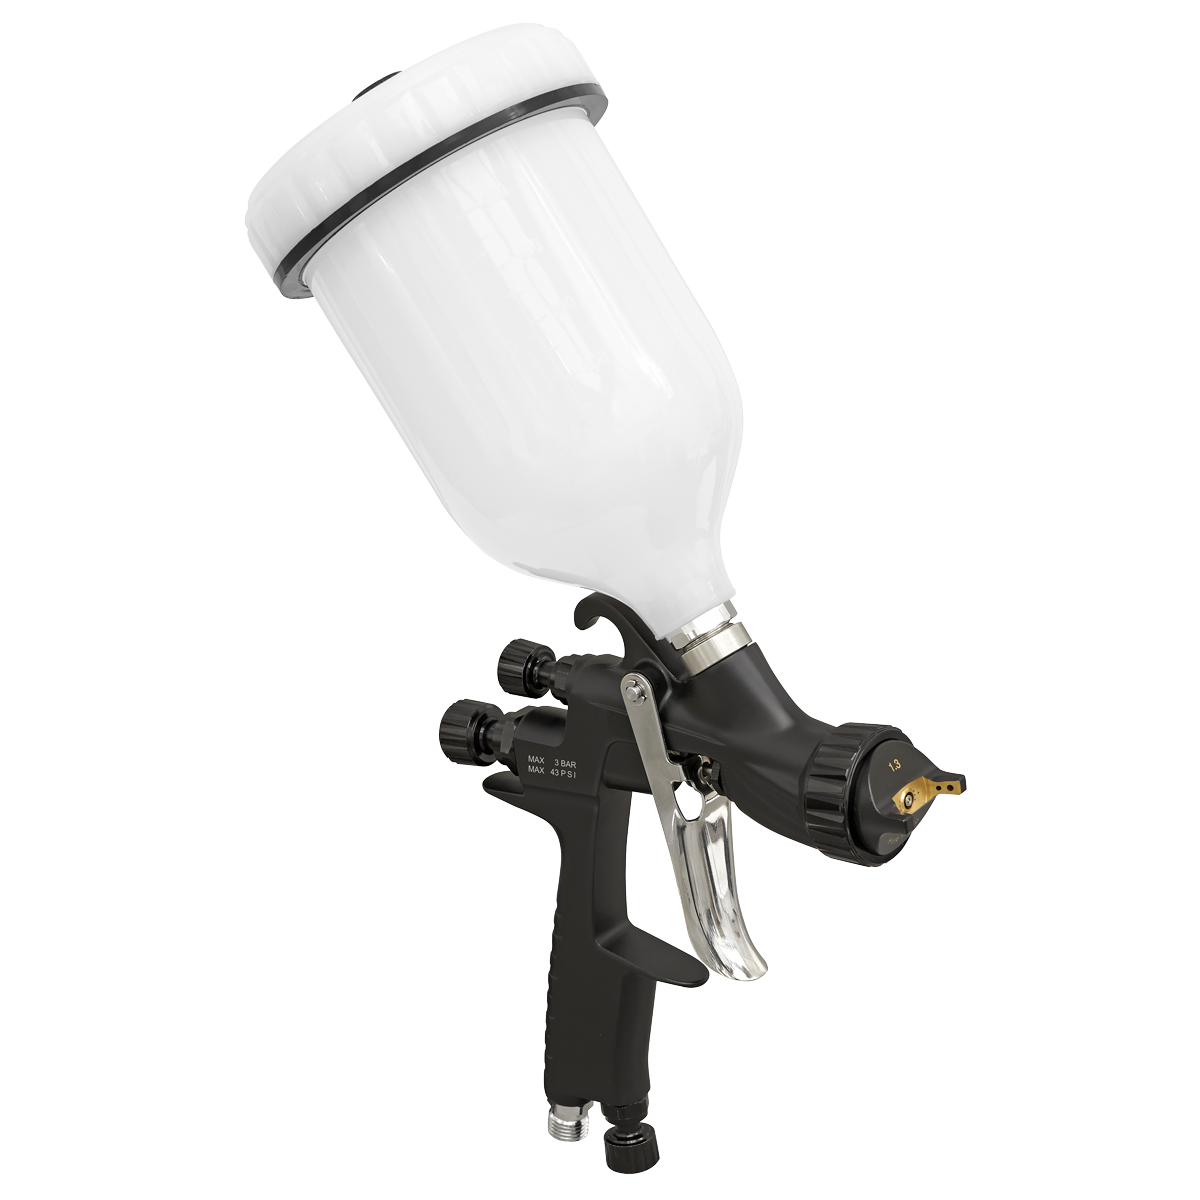 Sealey spray gun with  passages, needle, nozzle, air cap and air valve suitable for solvent and water-based paints.